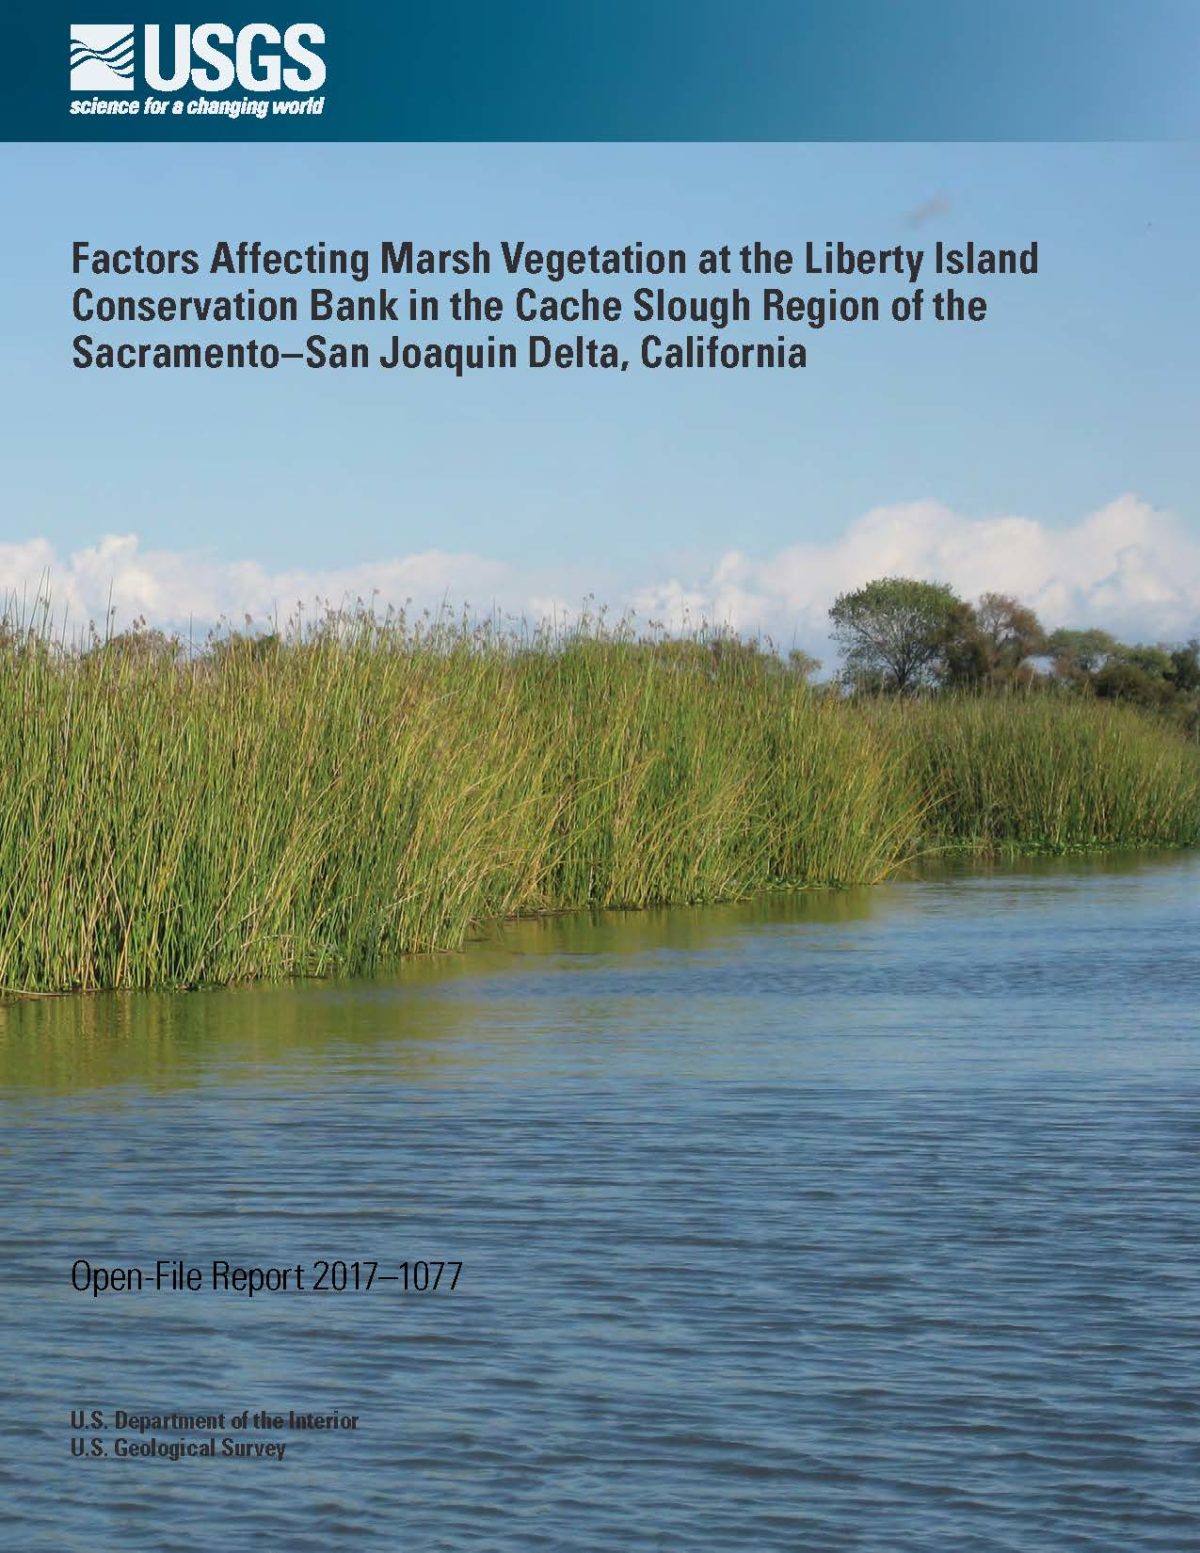 Factors Affecting Marsh Vegetation at the Liberty Island Conservation Bank in the Cache Slough Region of the Sacramento–San Joaquin Delta, California